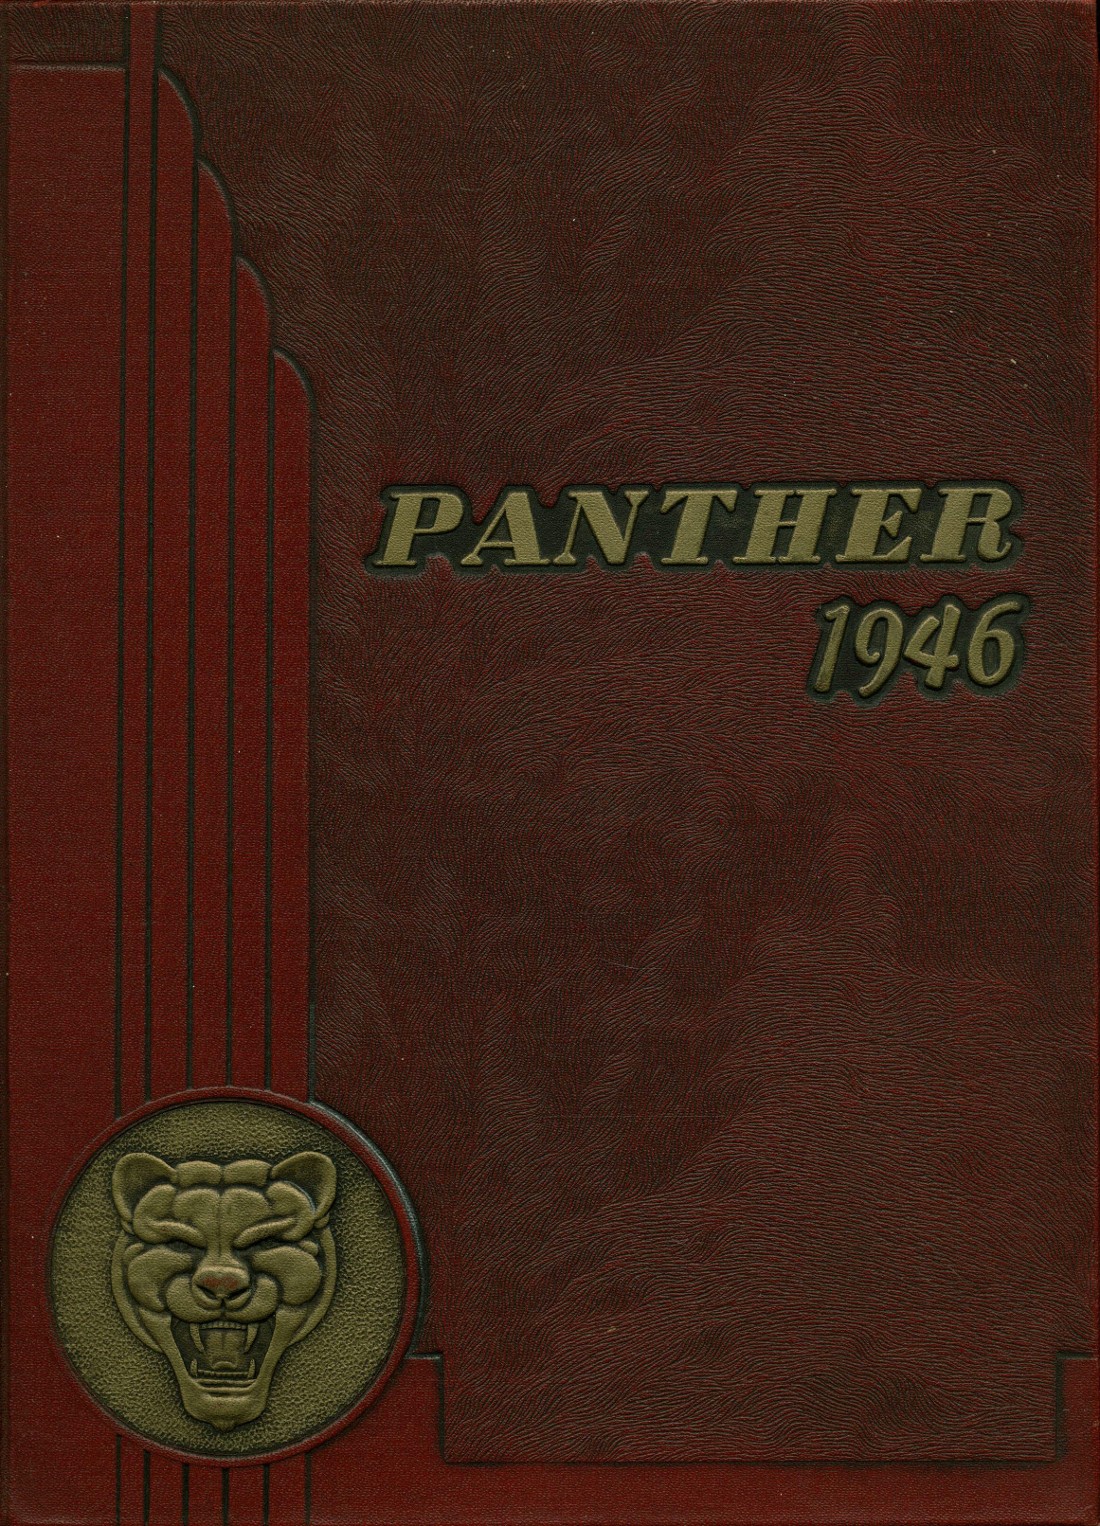 1946 yearbook from Lansford High School from Lansford, Pennsylvania for ...